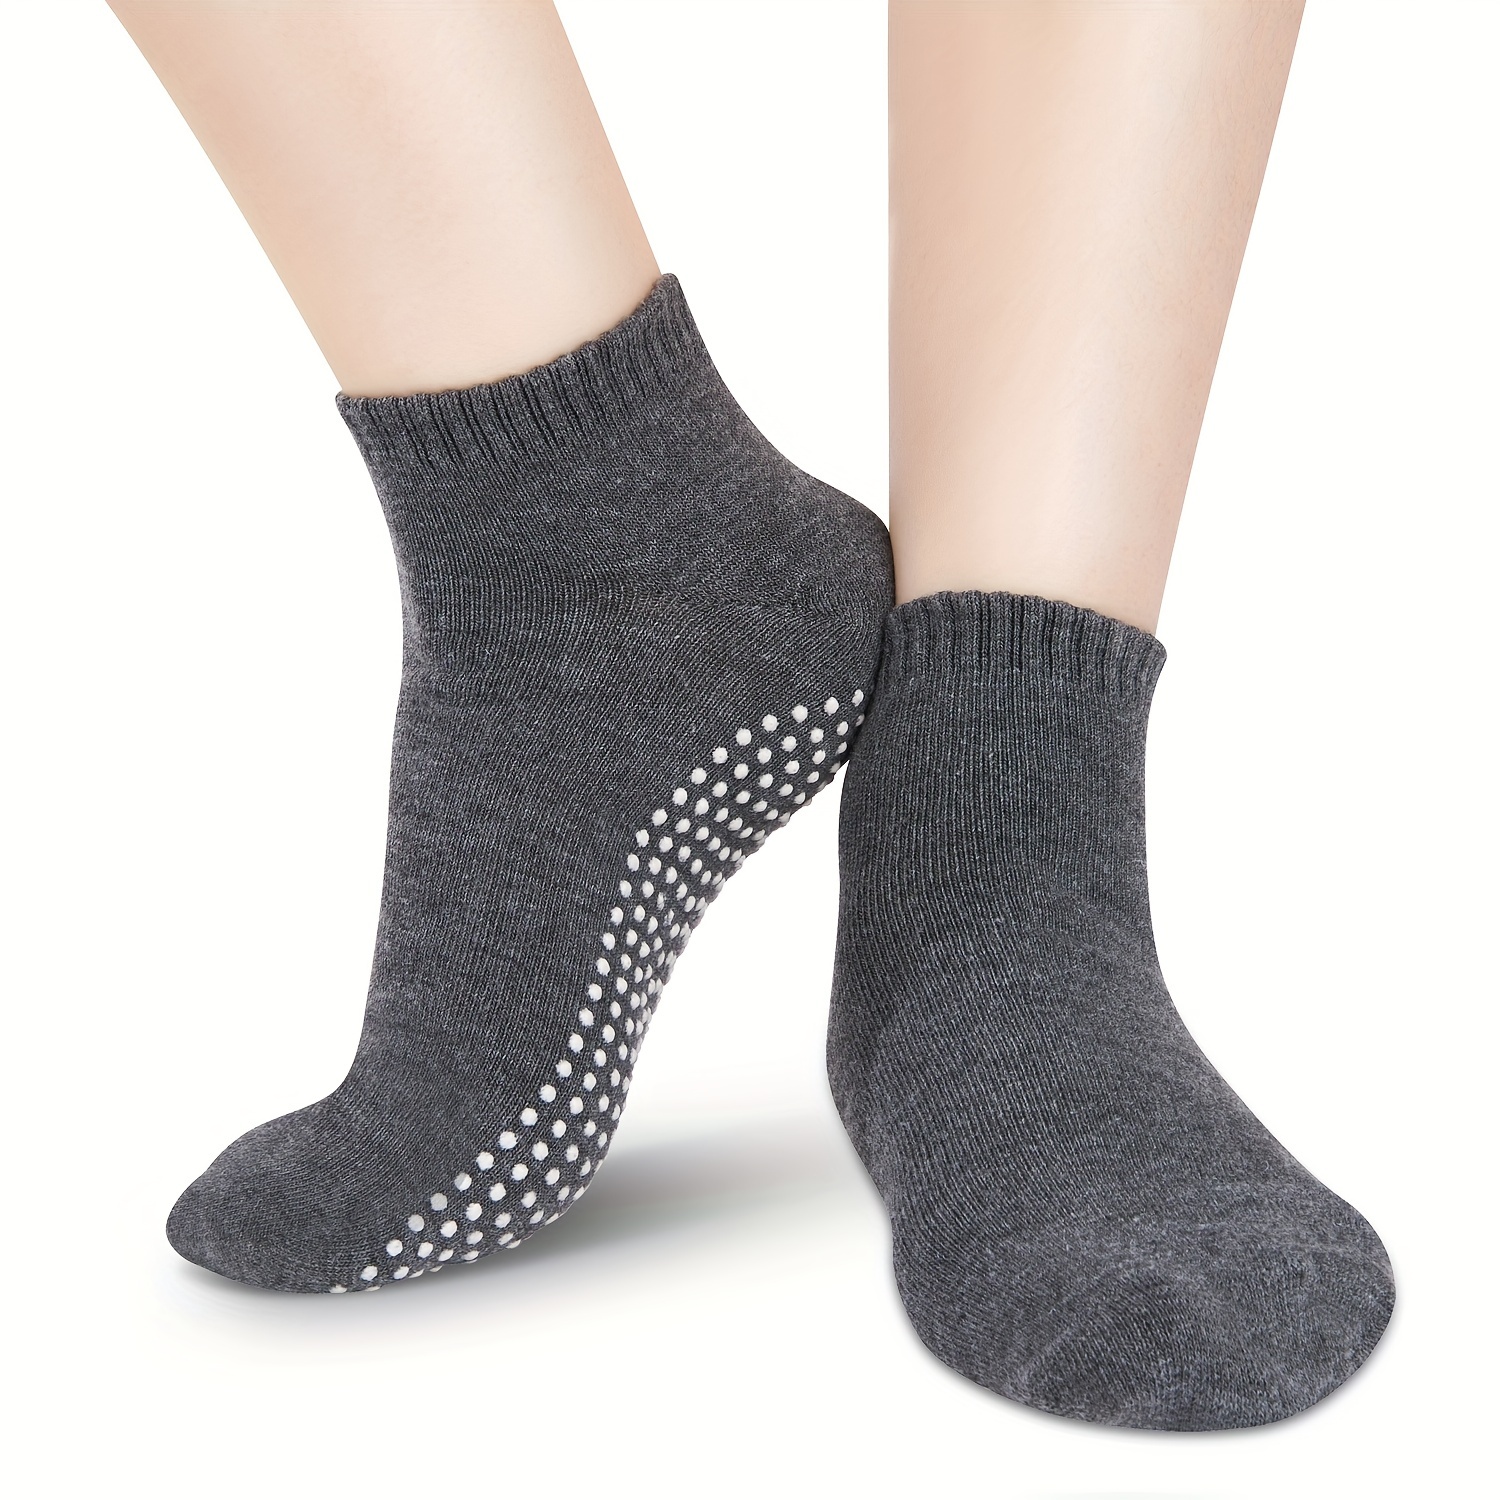 Grippers Women And Man Non Slip Ankle Grip Socks Yoga Sock Socks with Grips